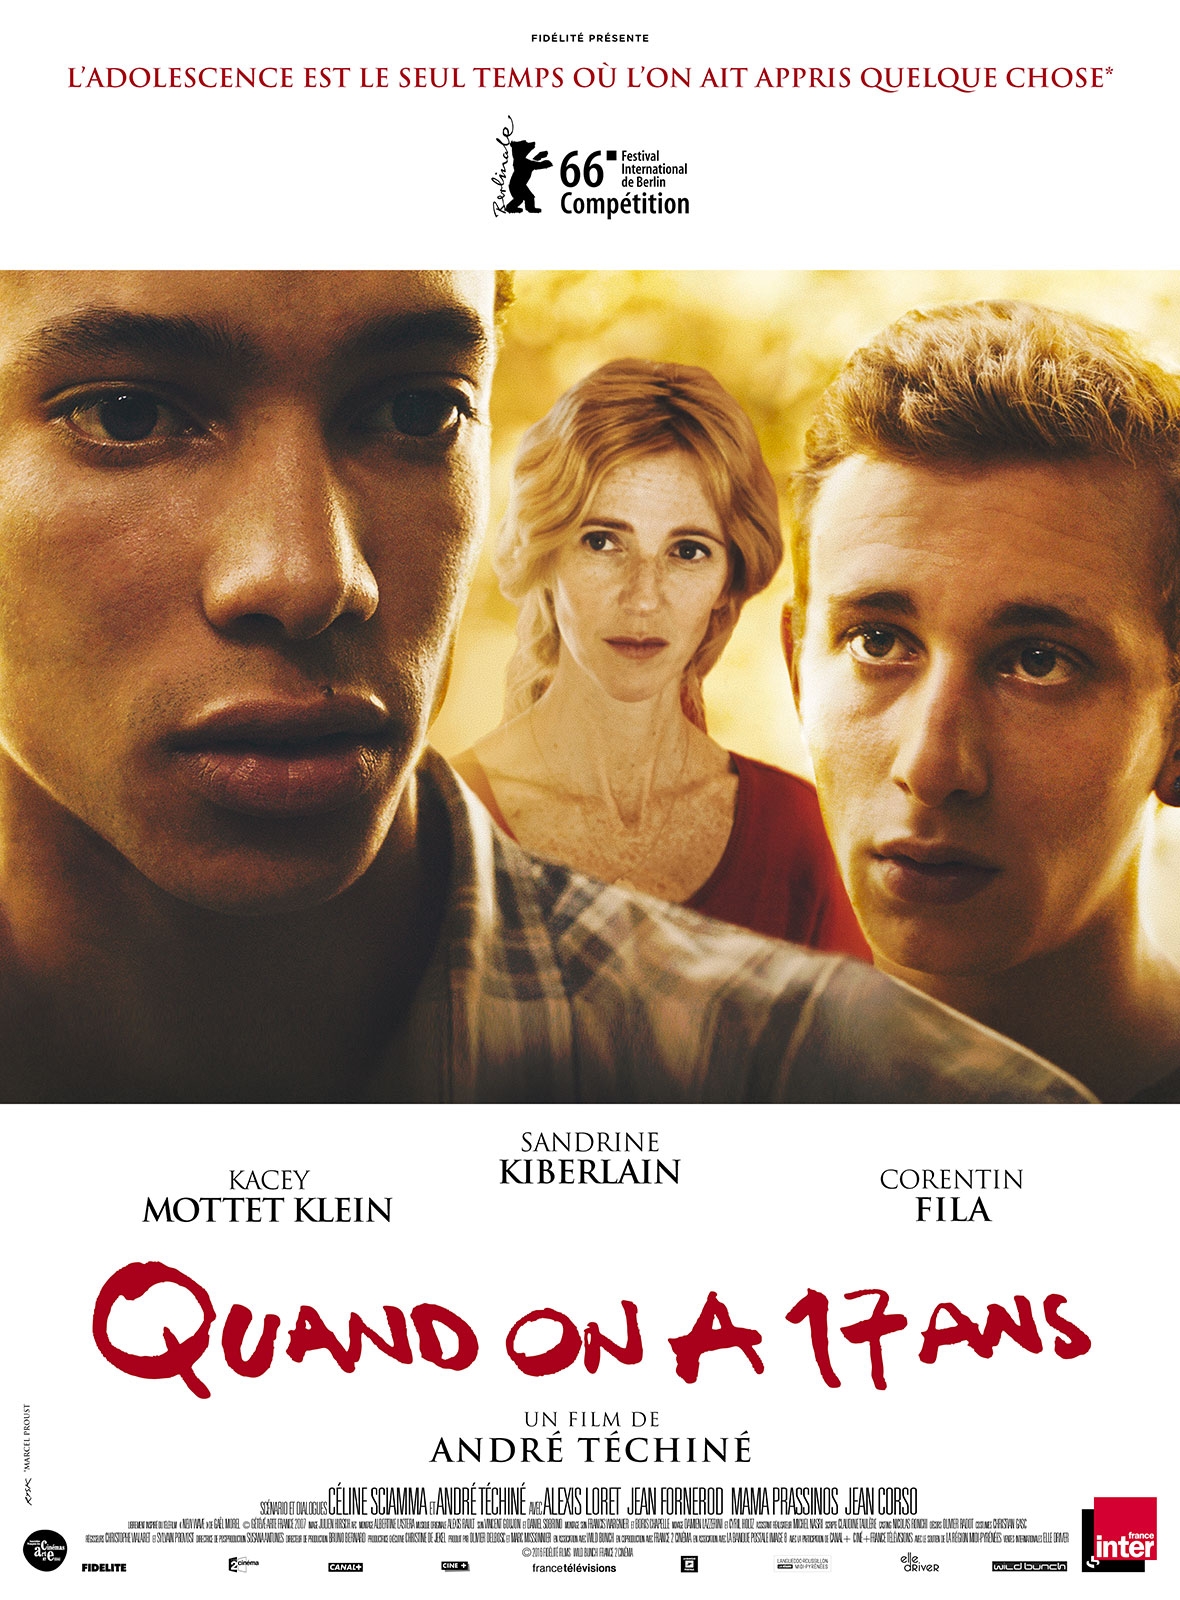 Quand on a 17 ans (2016) (Poster)